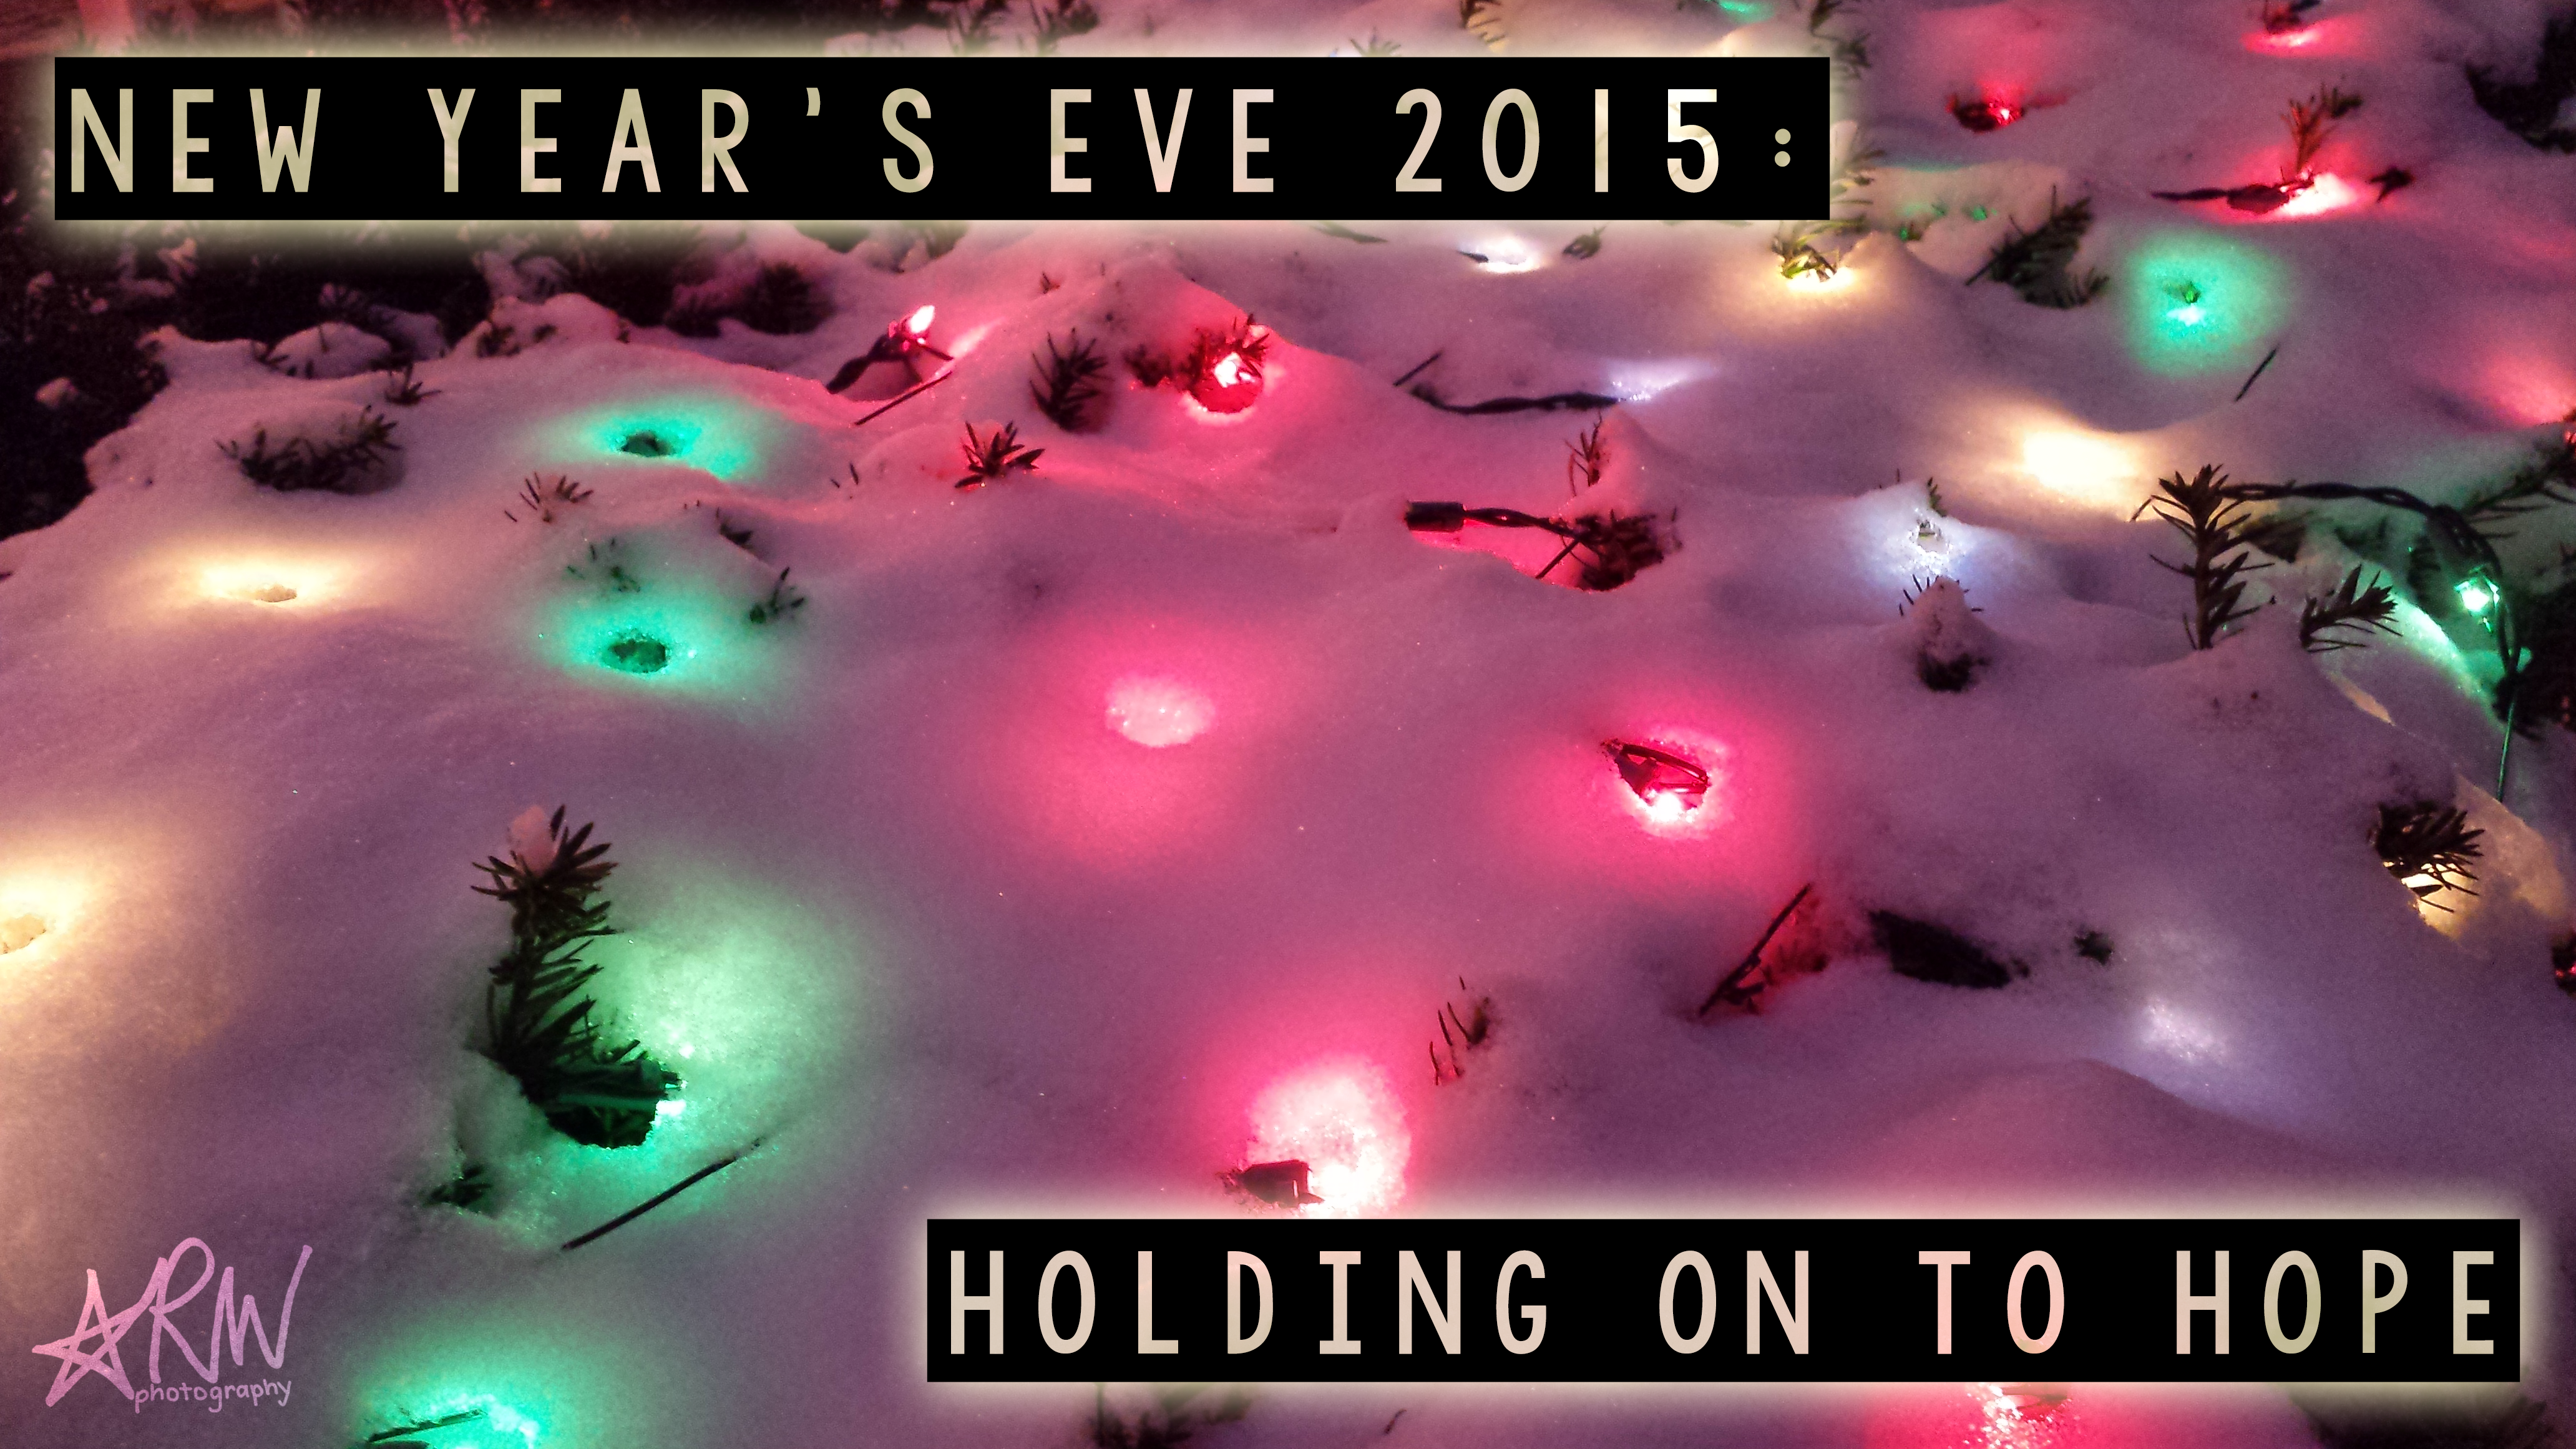 New Year’s Eve 2015: Holding on to Hope